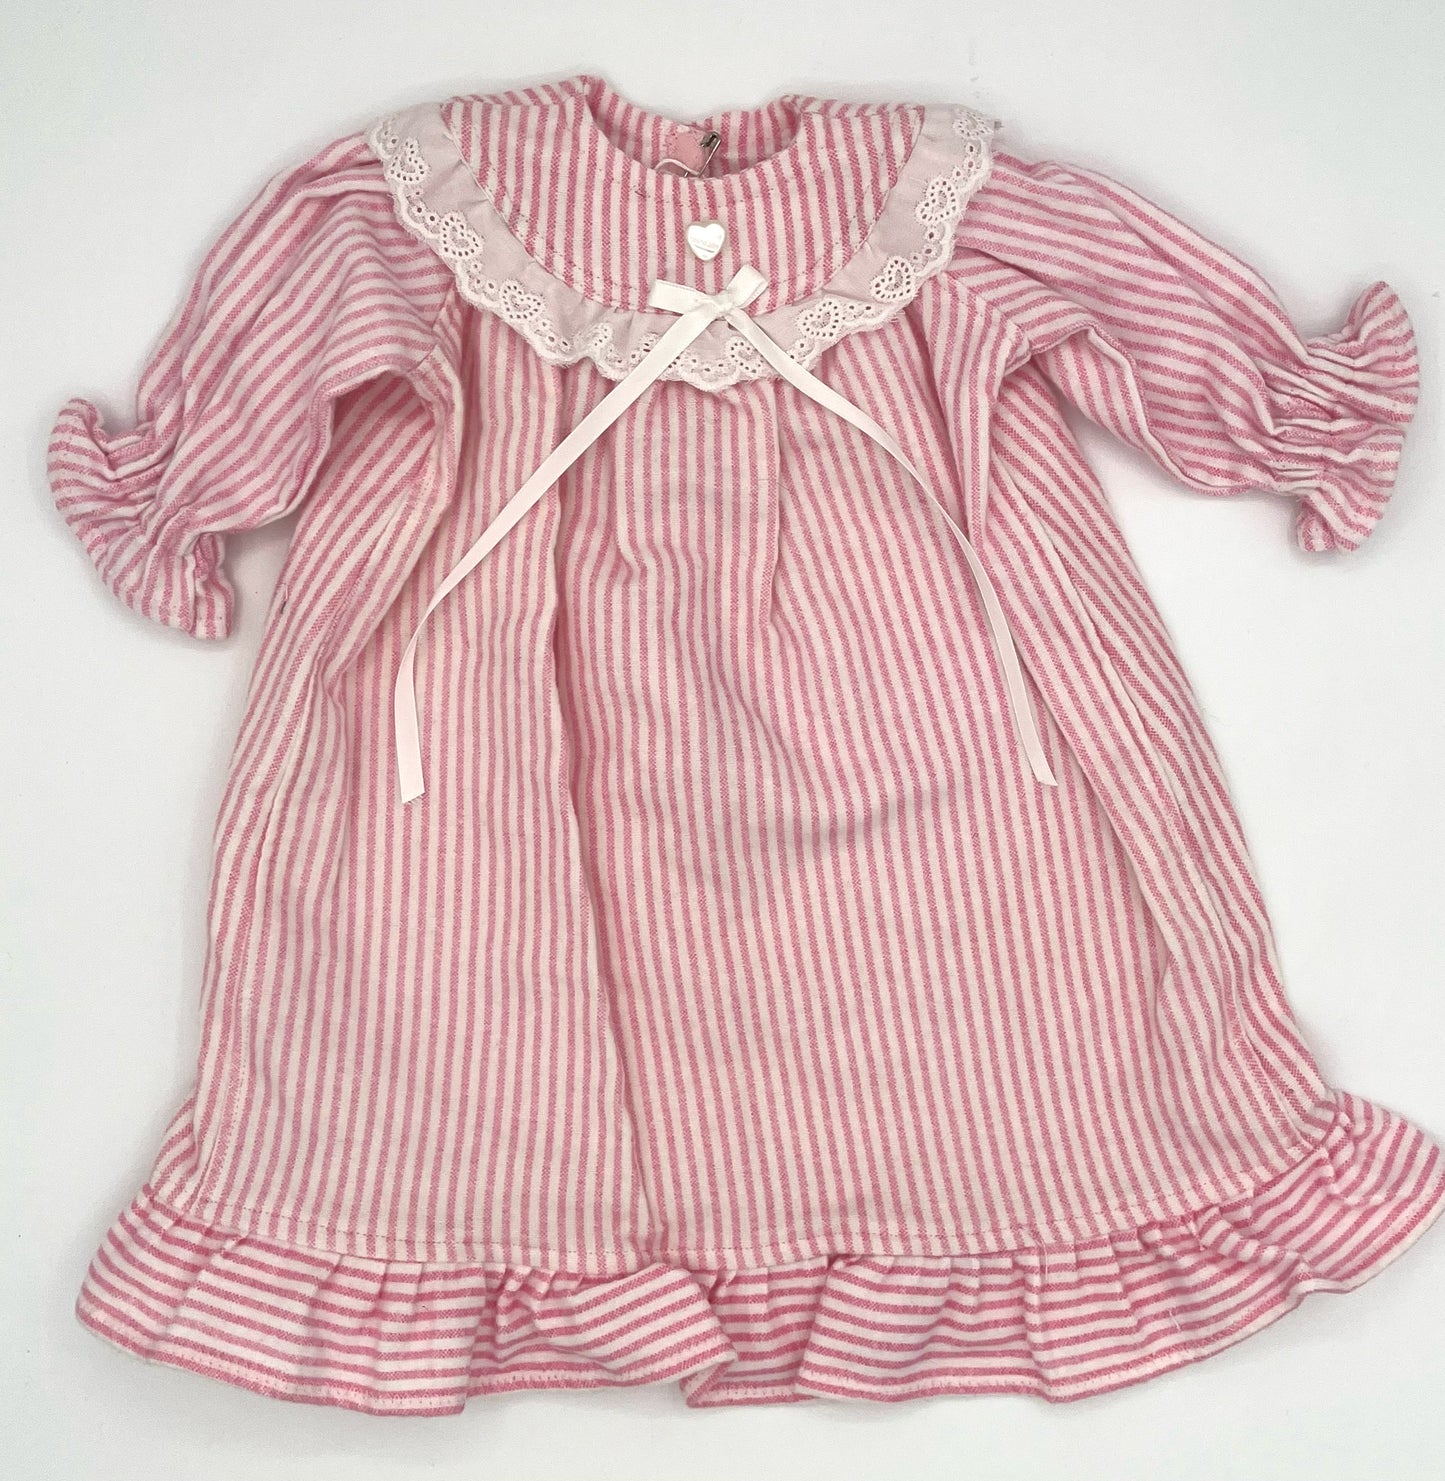 Candystripe Pink Flannel Nightgown for 18" Doll